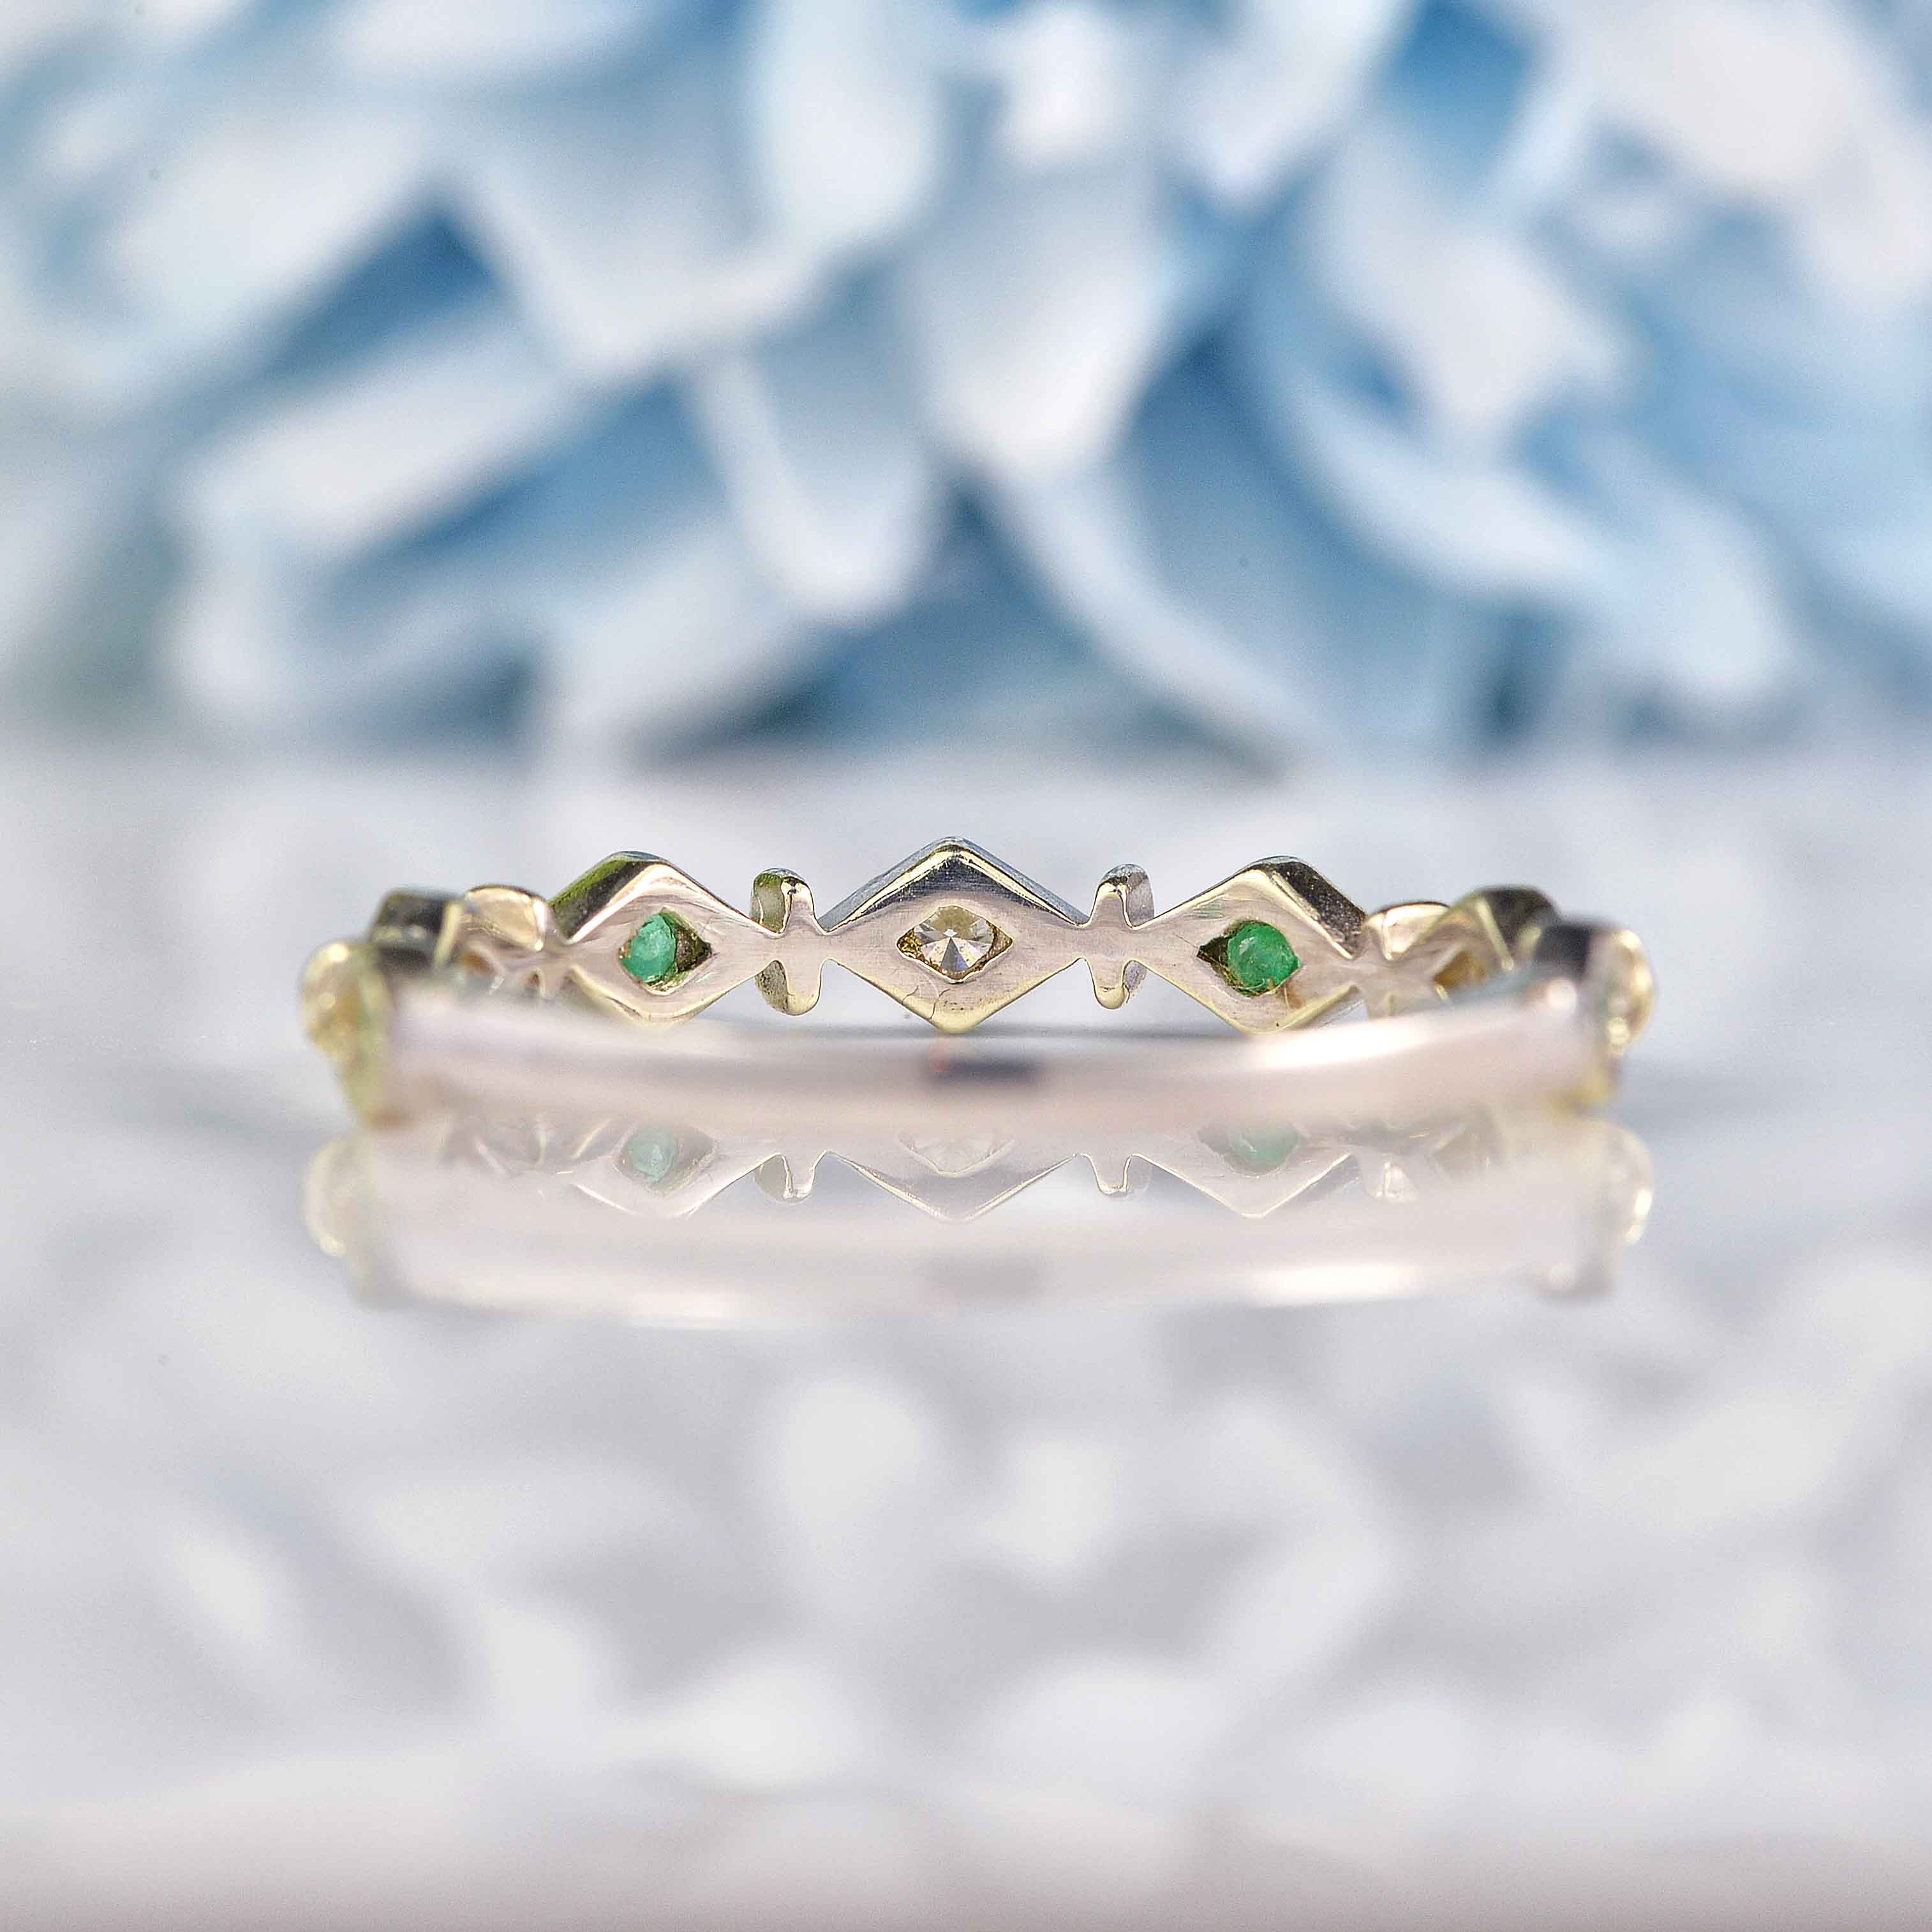 Ellibelle Jewellery Emerald & Diamond 9ct White Gold Stacking Band Ring